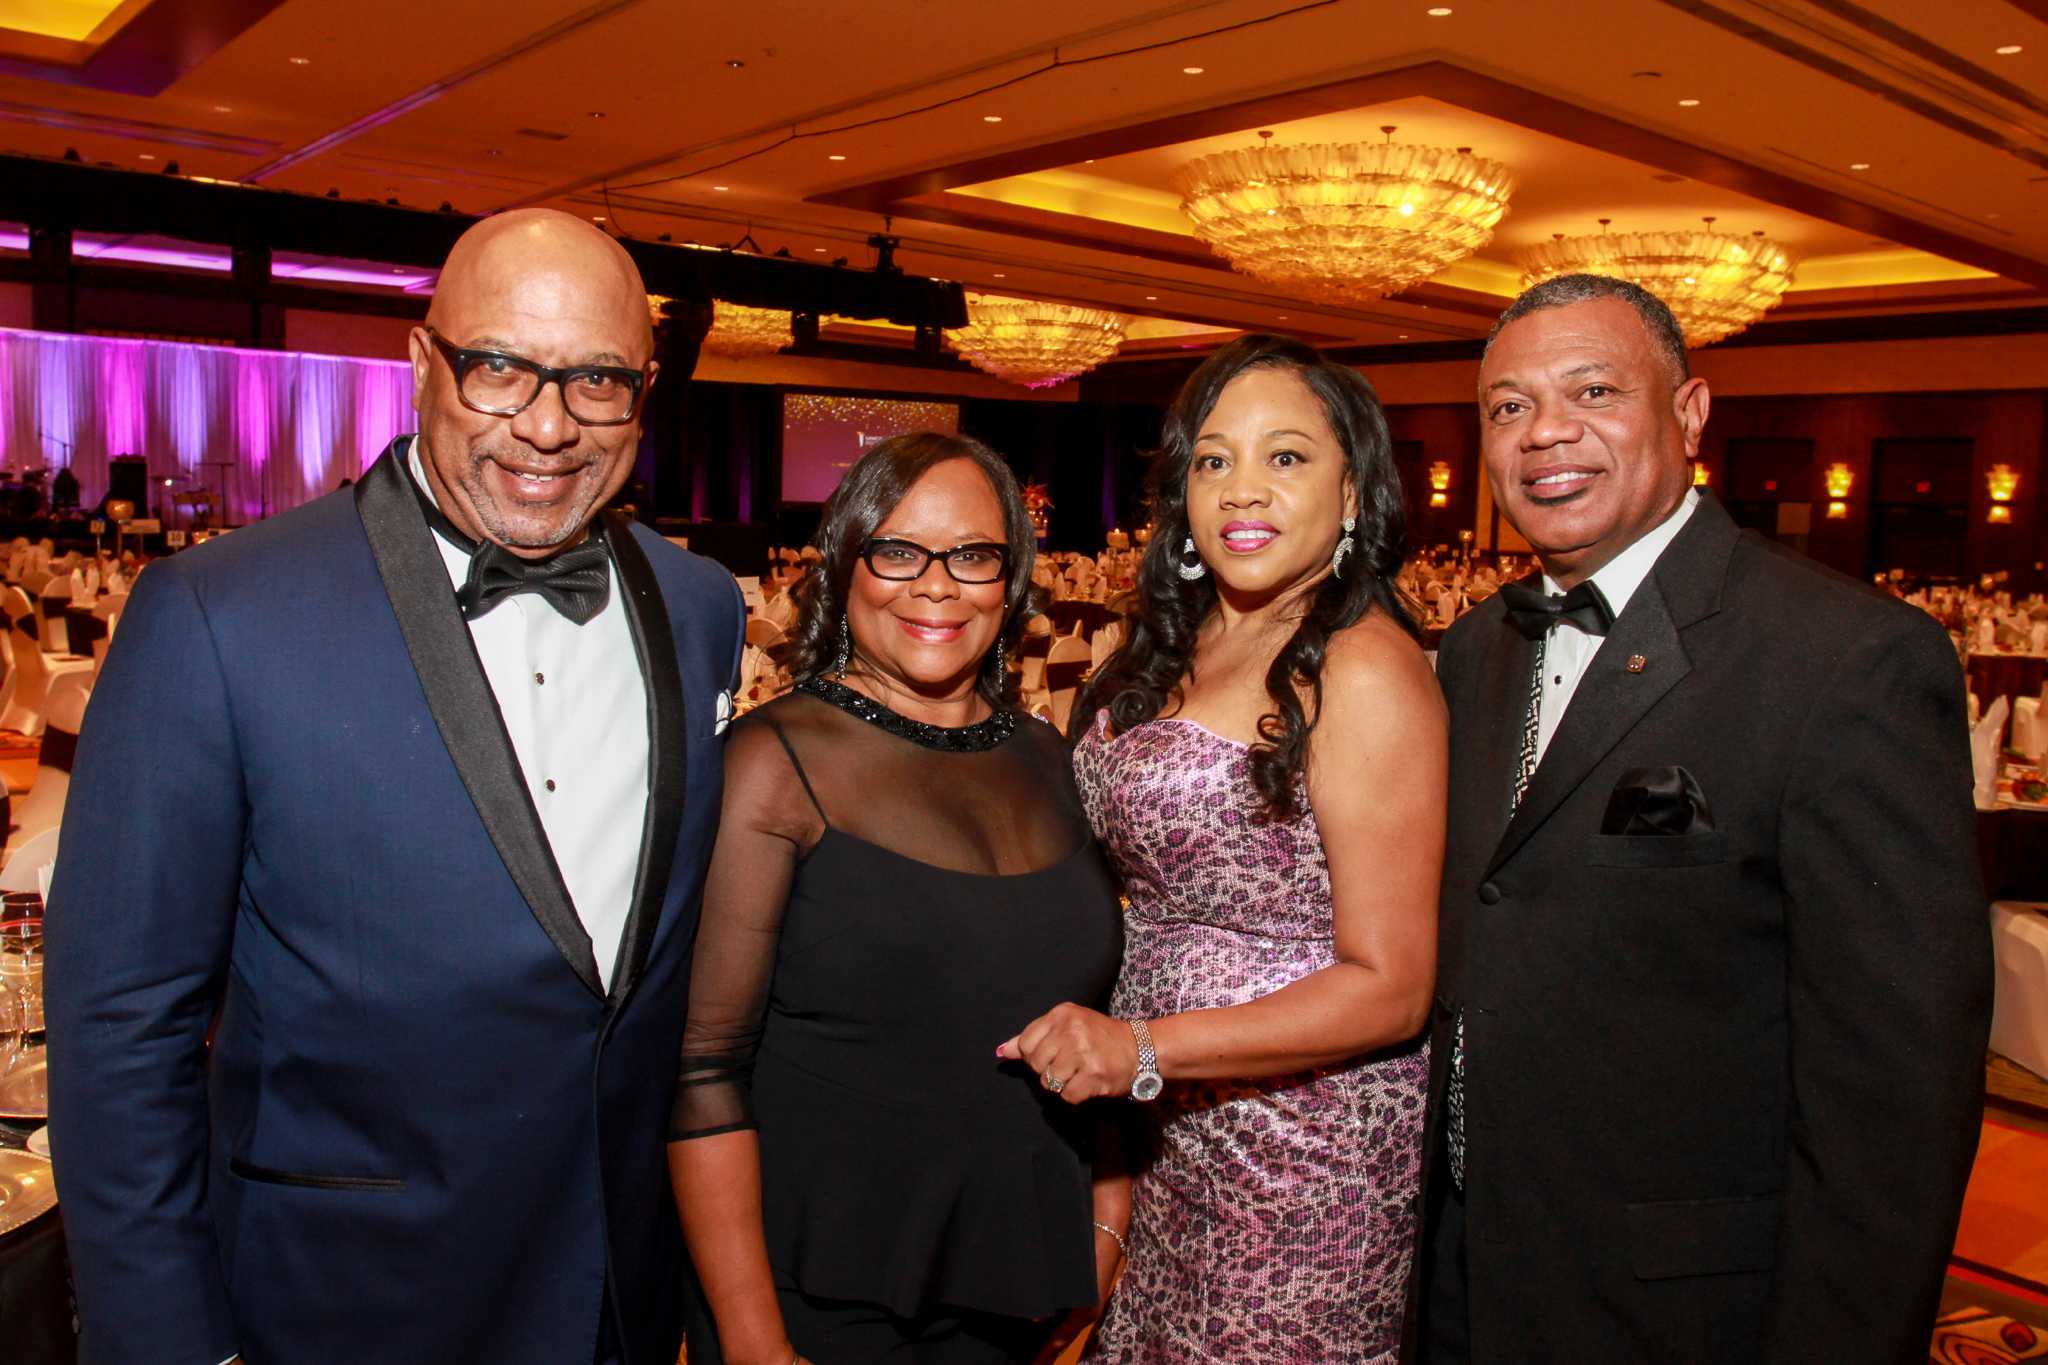 Sheila E brings guests to their feet at UNCF gala